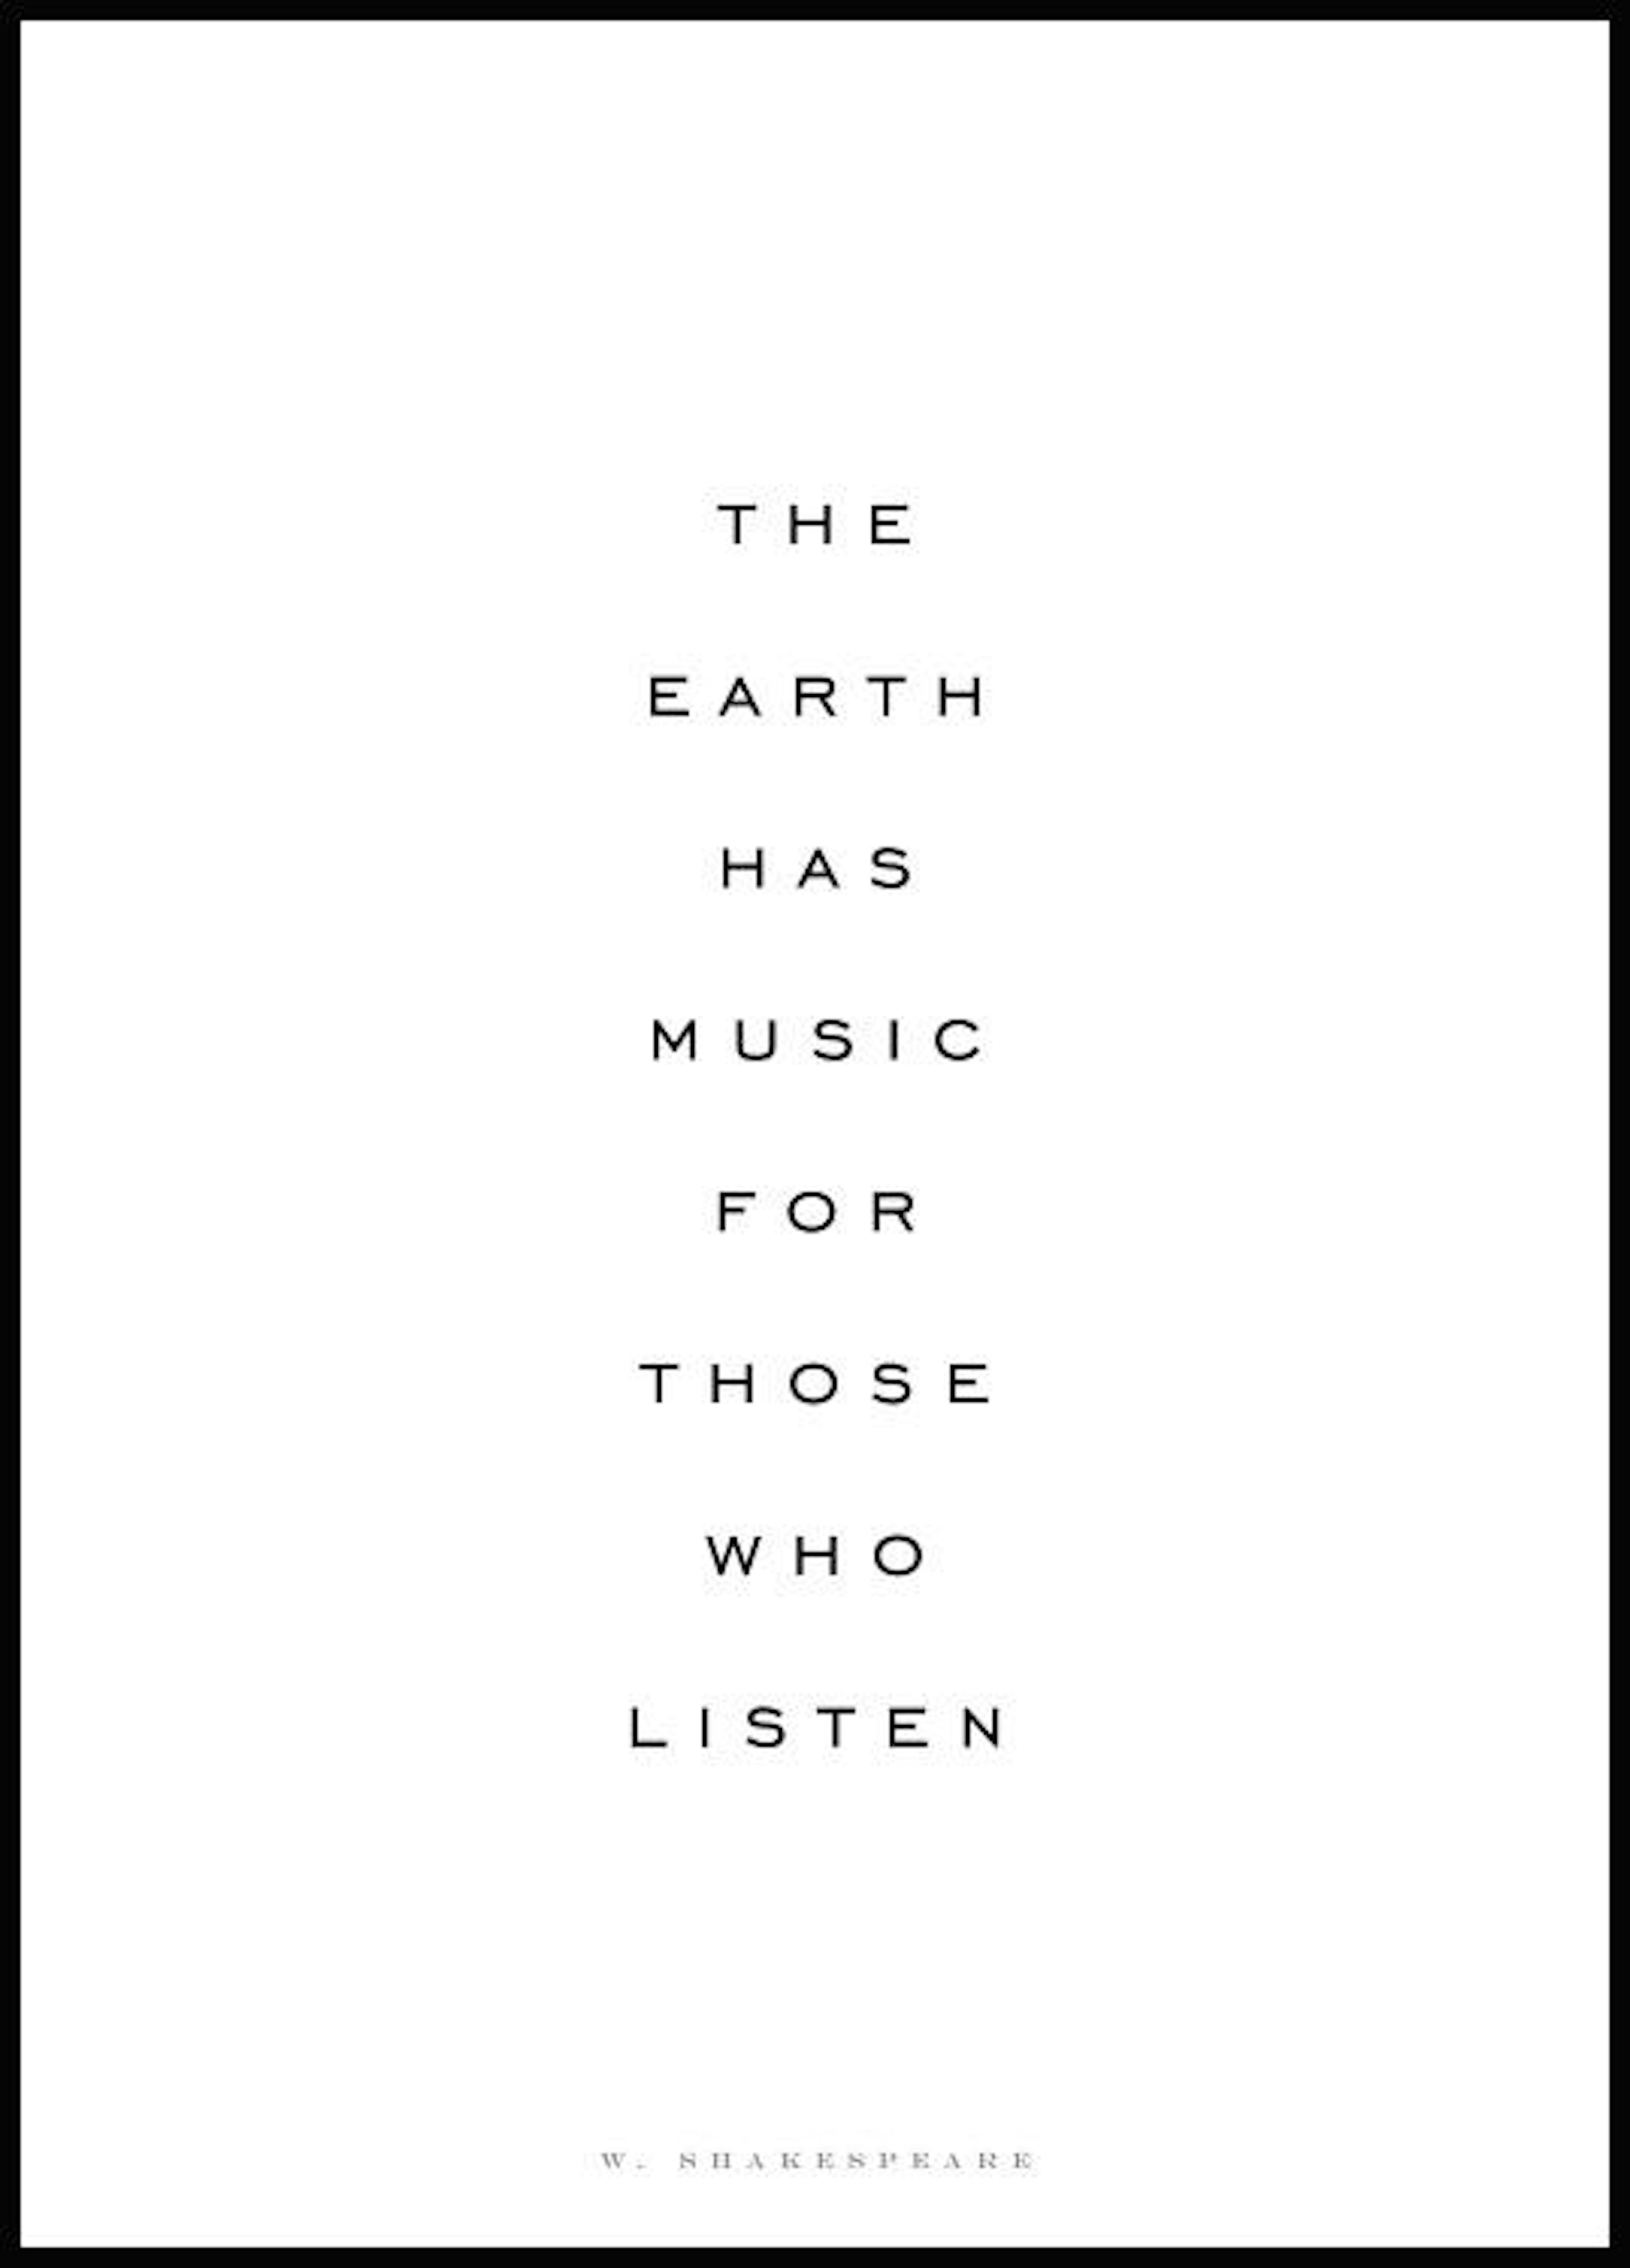 The Earth Has Music Juliste 0